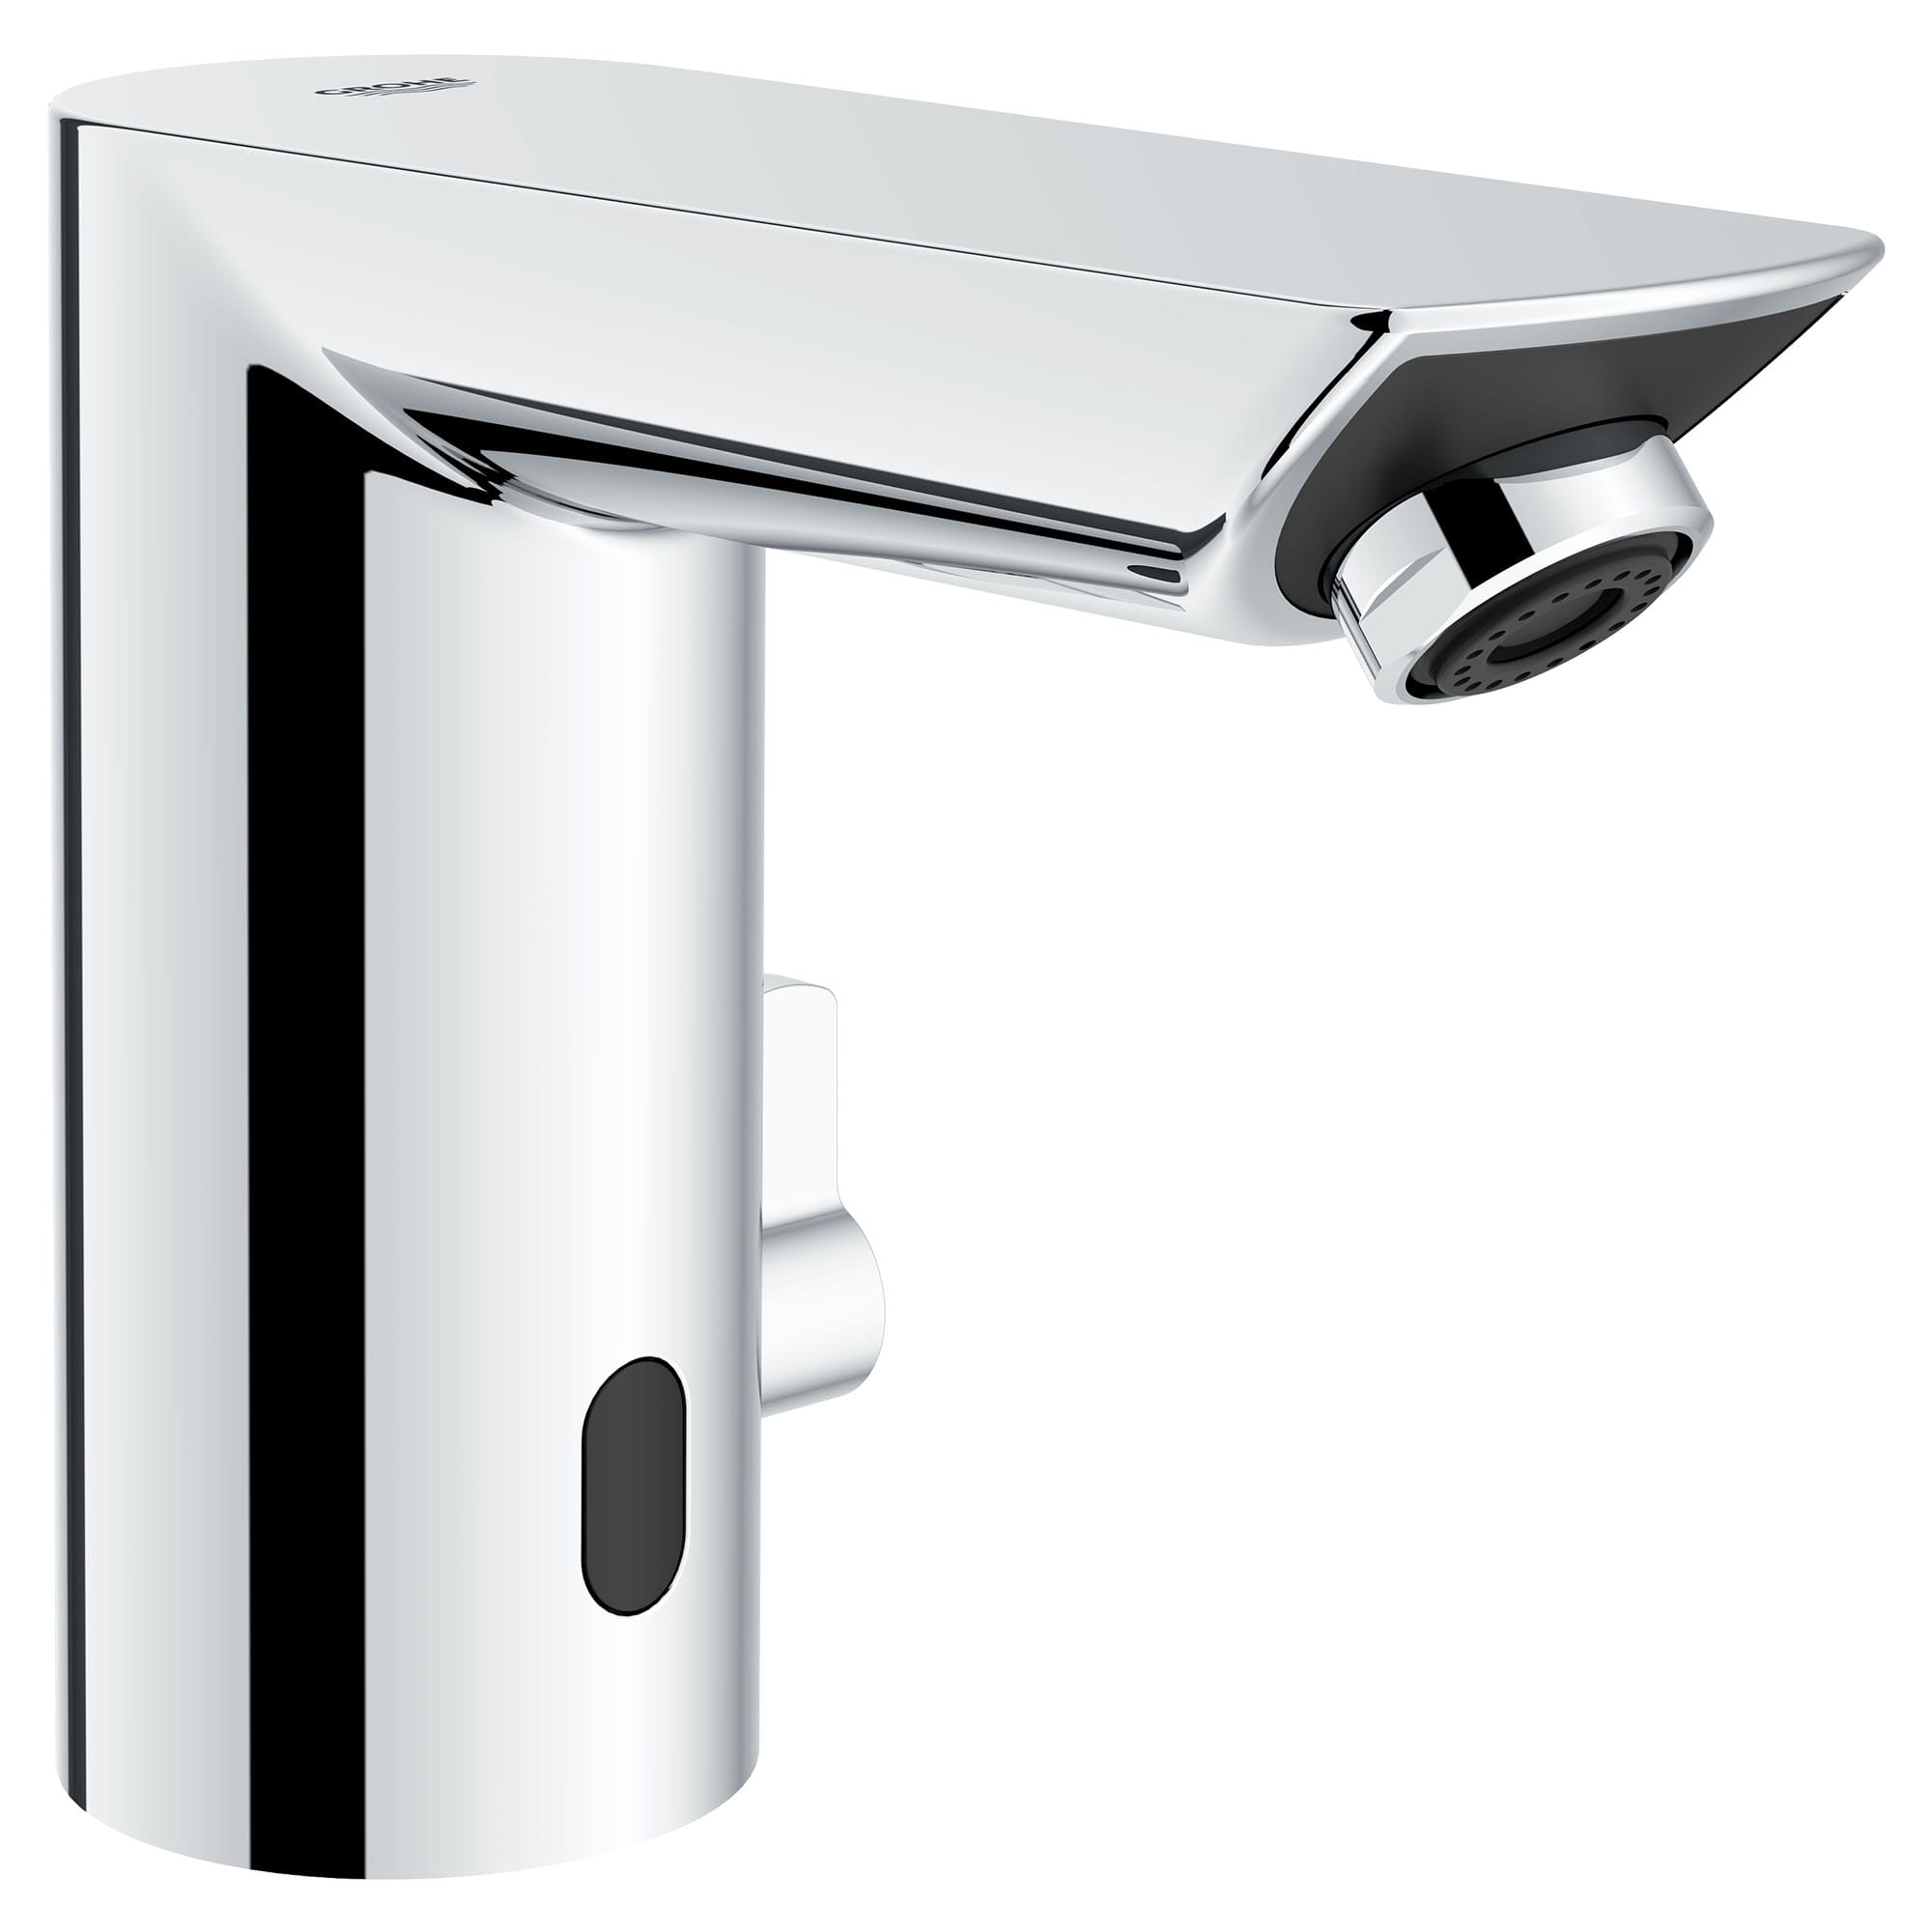 E Touchless Electronic Faucet With Temperature Control Lever